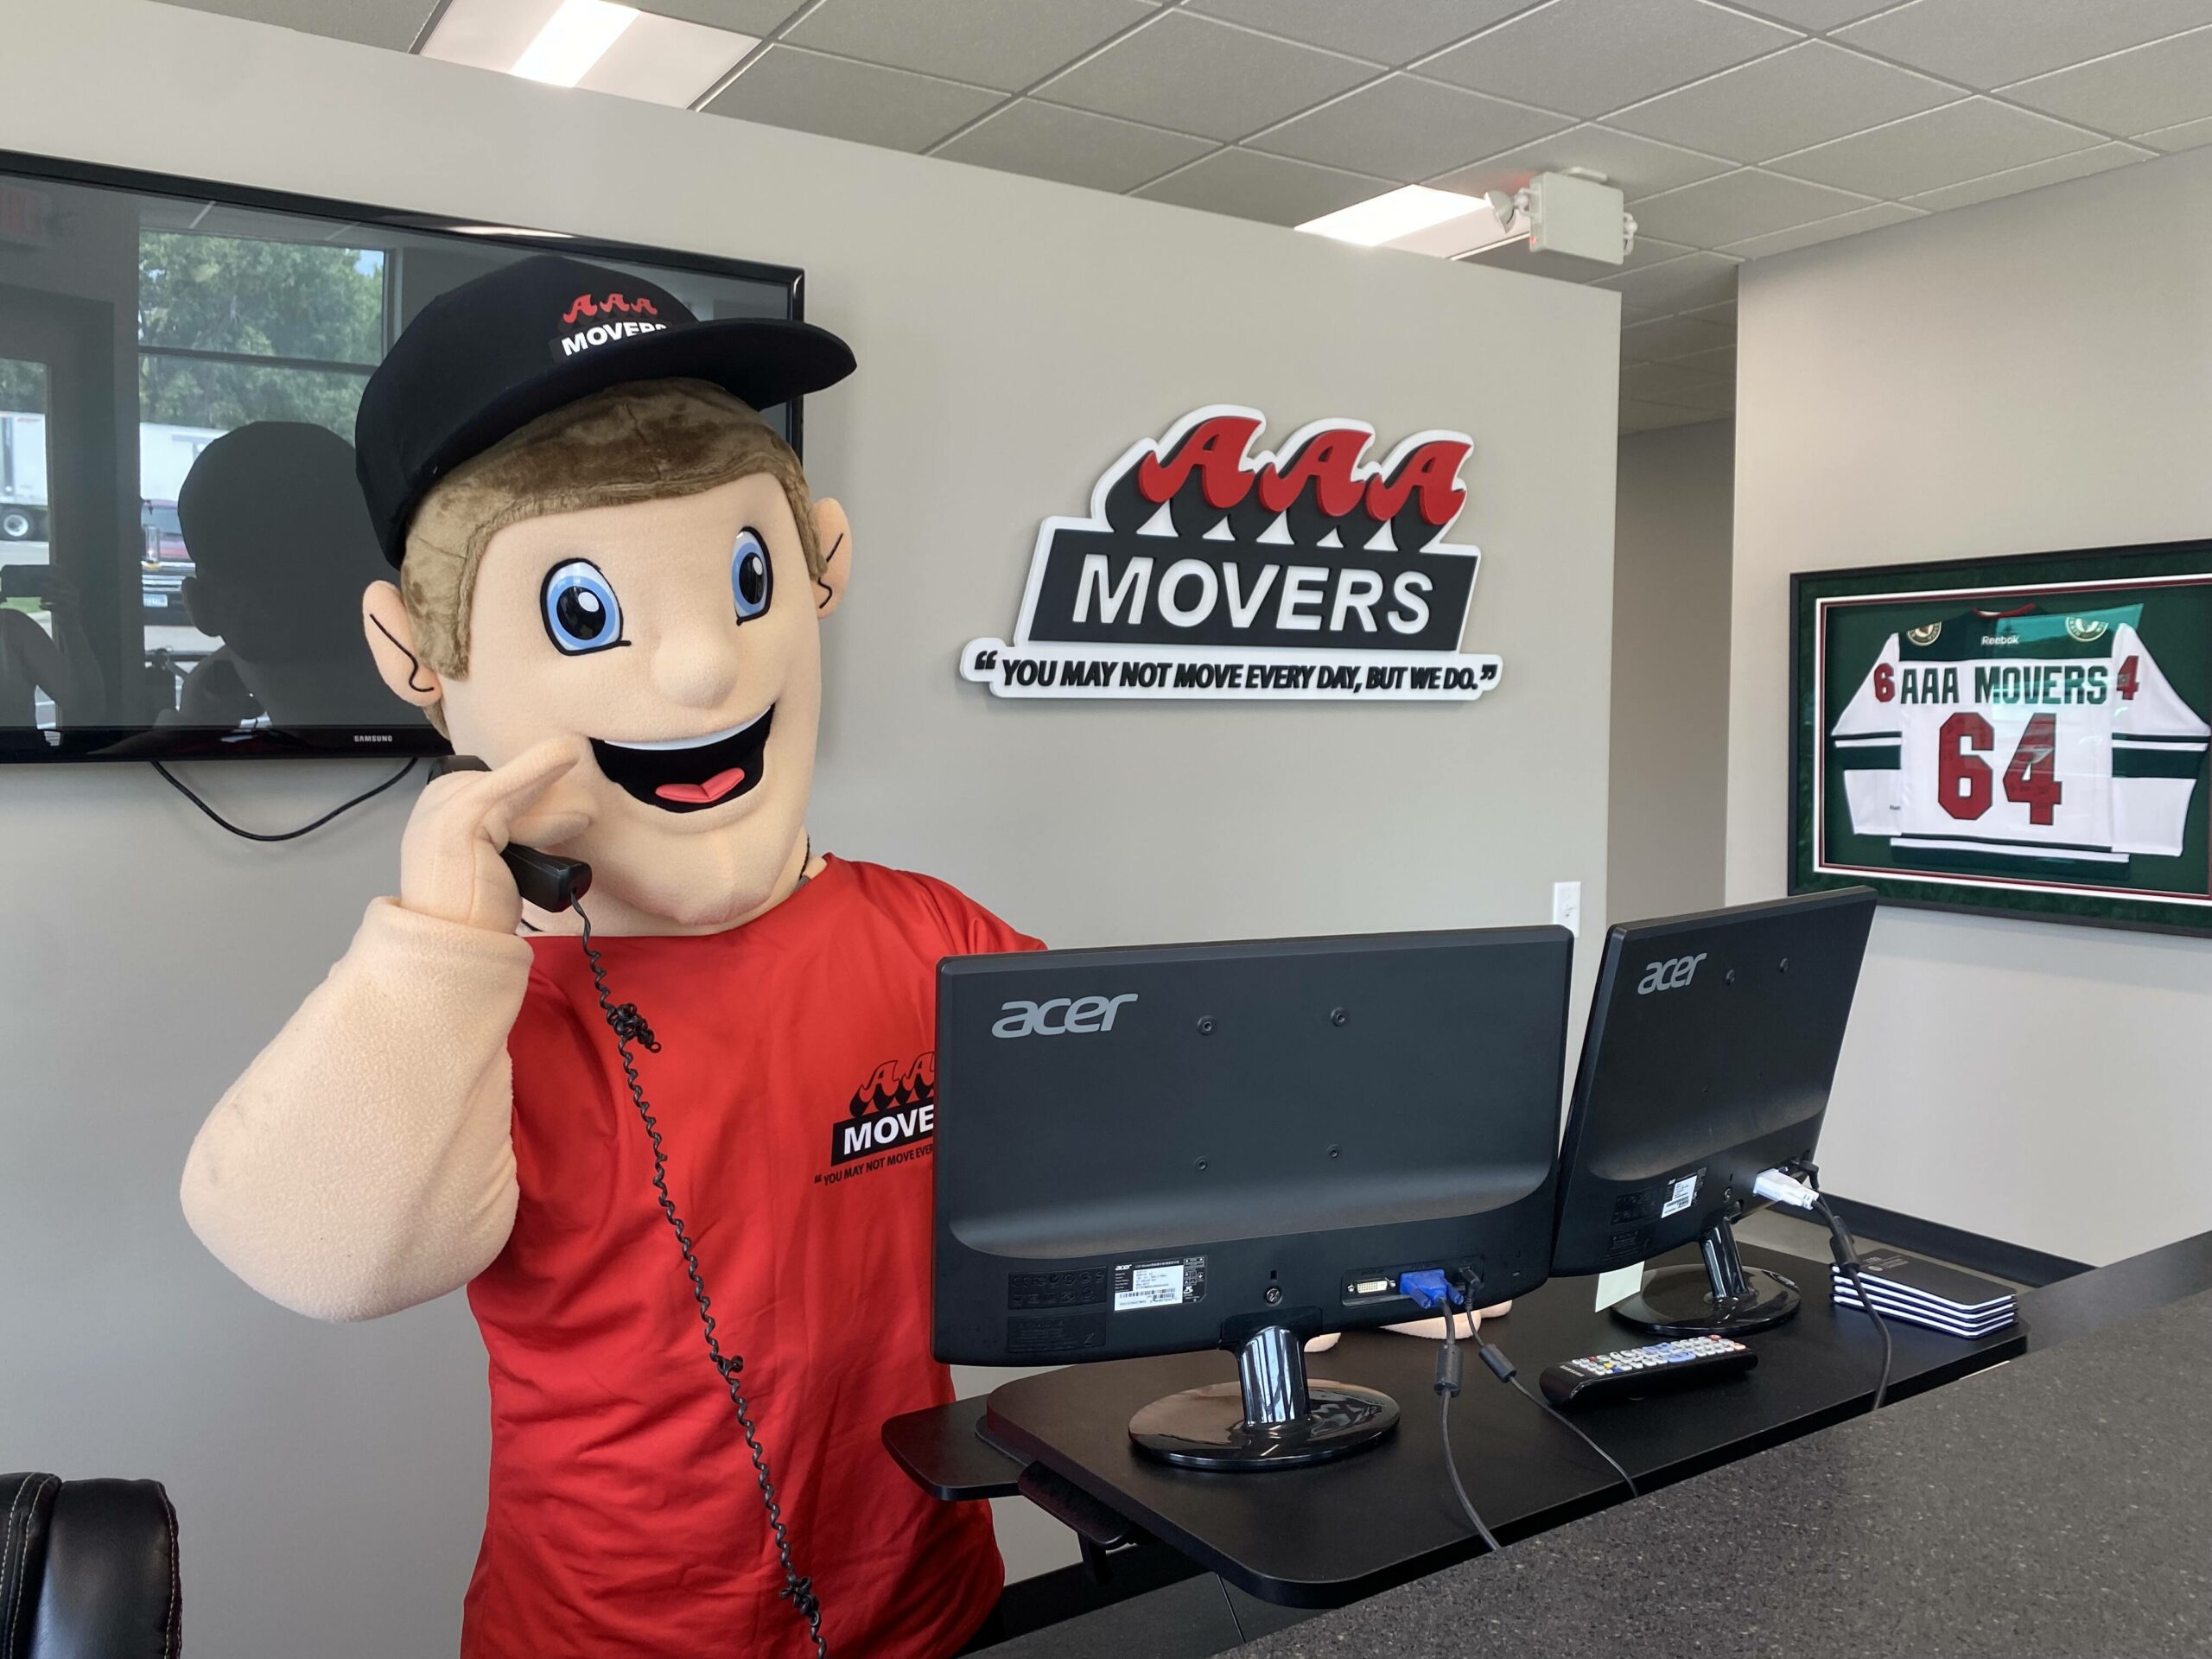 Marty, our mascot, answering the phone in the AAA Movers office